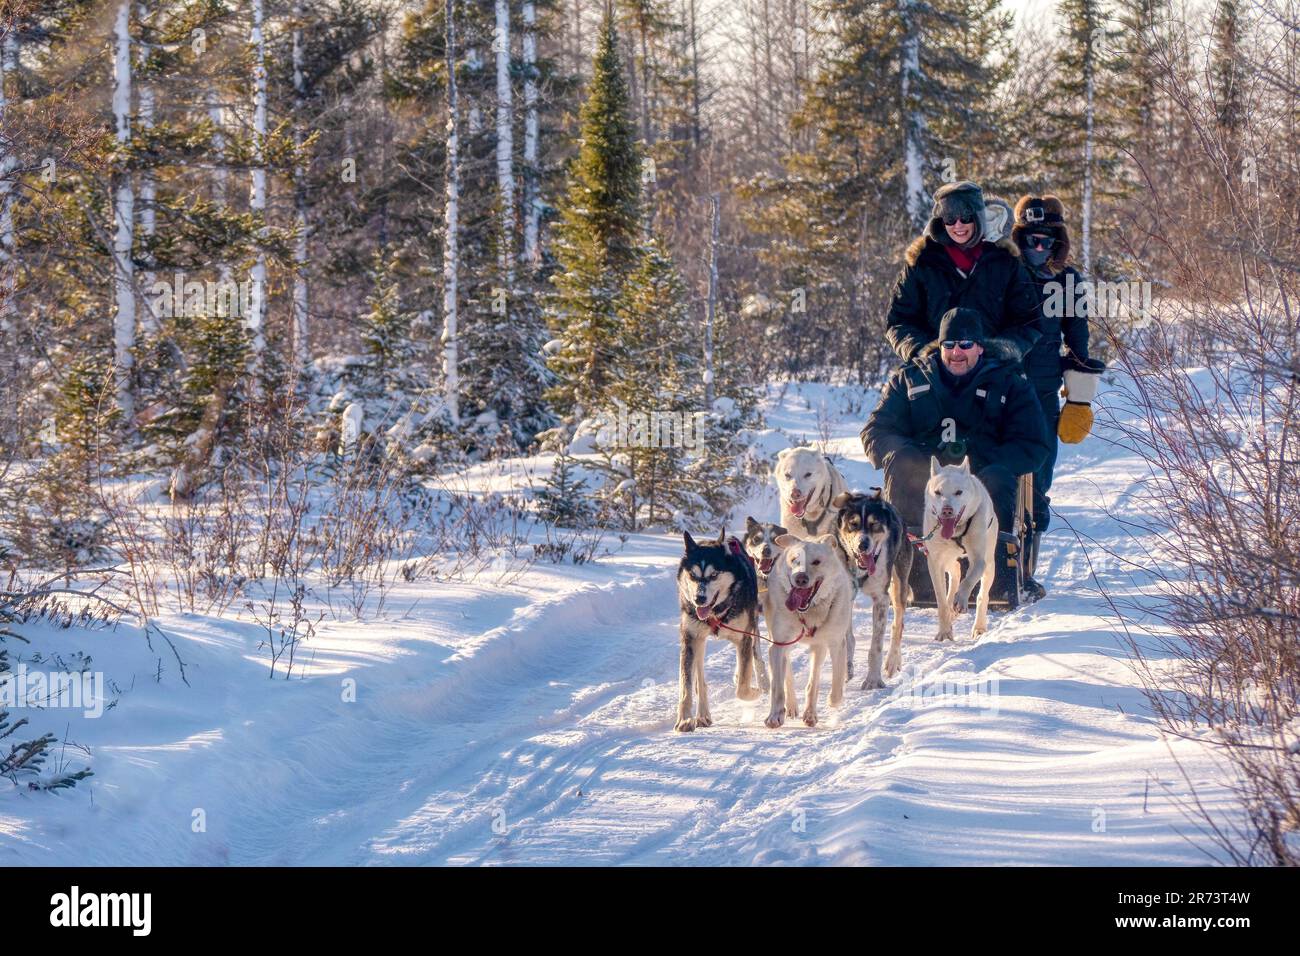 Churchill, Manitoba, Canada - Nov 13, 2014. A team of six sled dogs pulls two tourists and a musher on a snowy trail in a boreal forest. Stock Photo